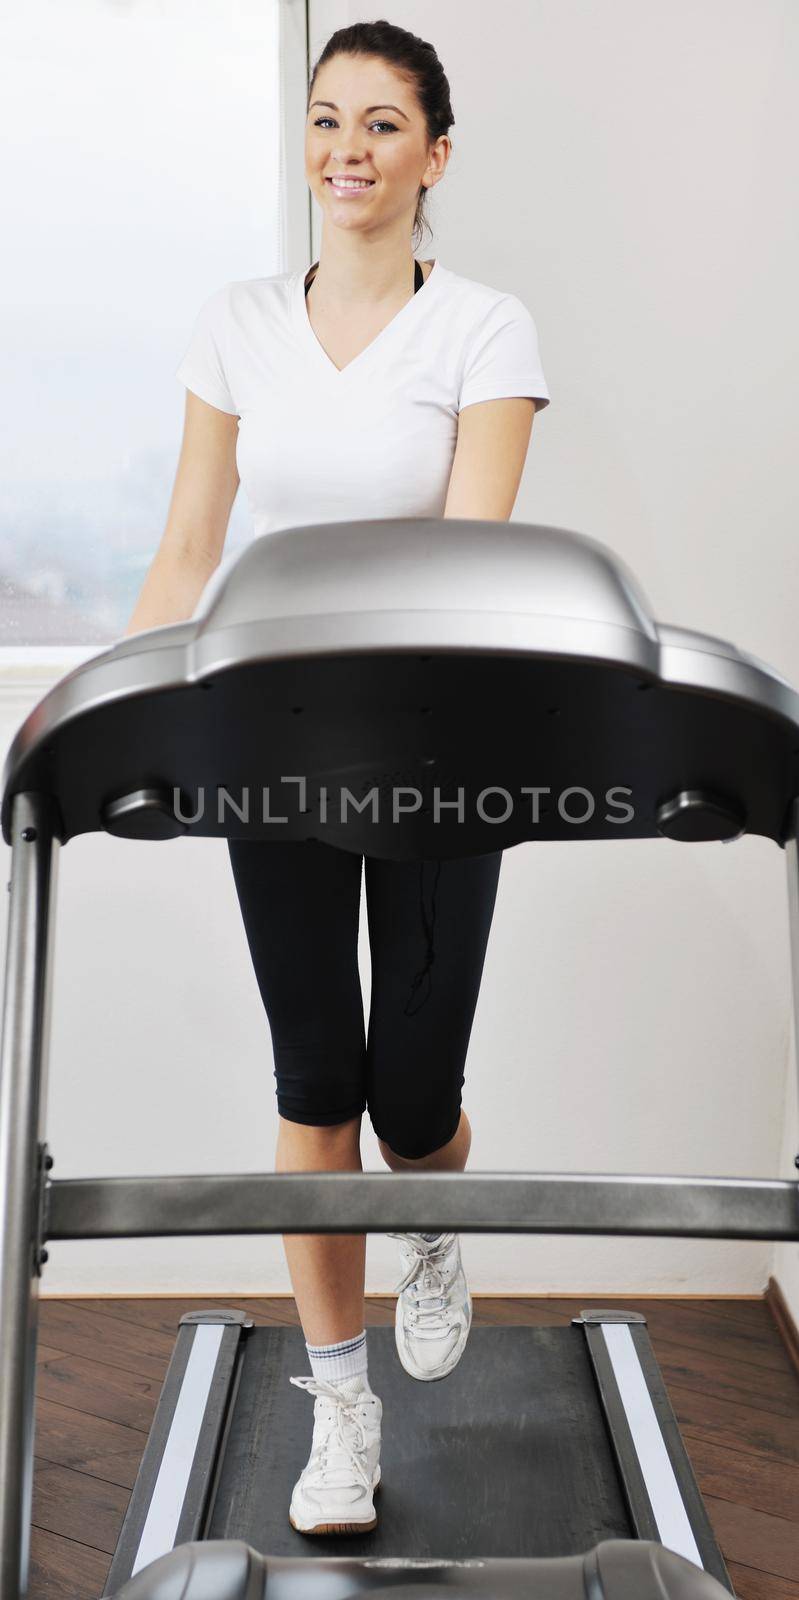 womanworkout  in fitness club on running track machine  by dotshock